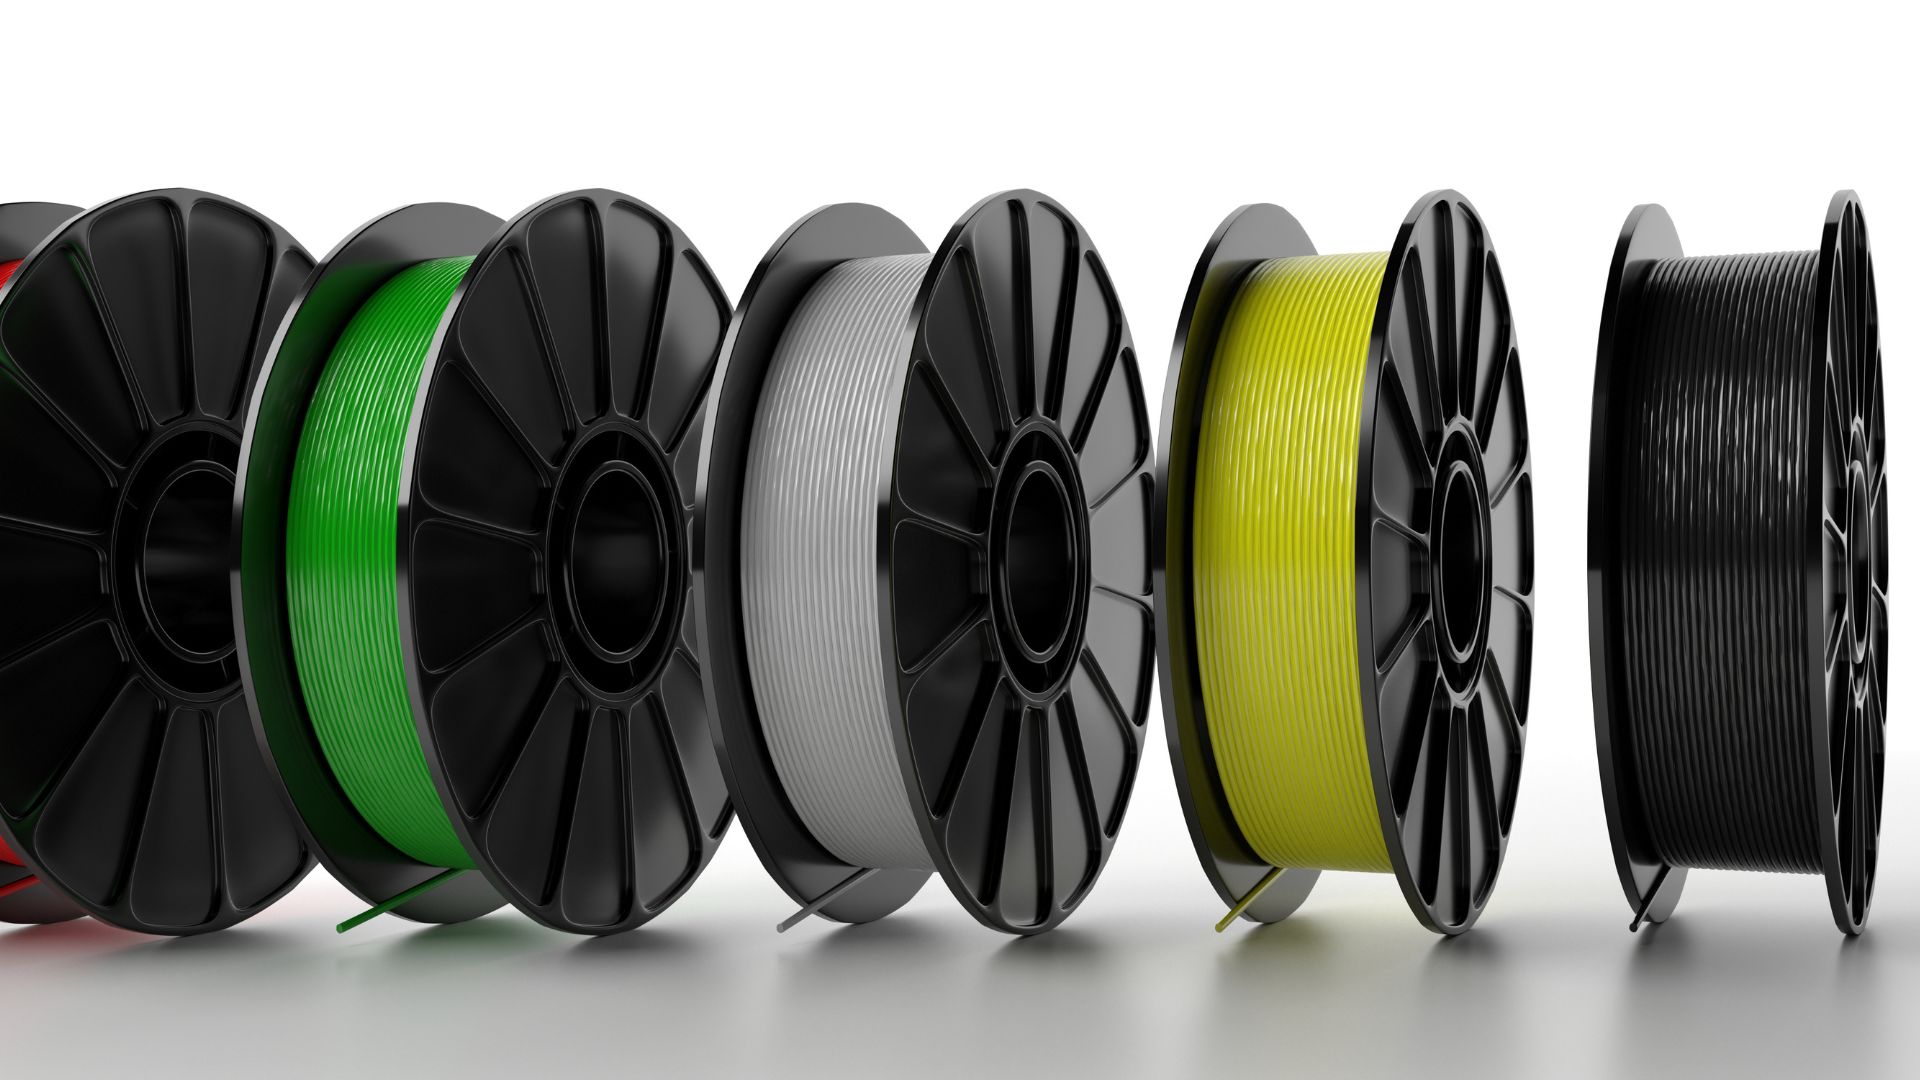 Can Tough PLA 3D Printer Filament Be Recycled?